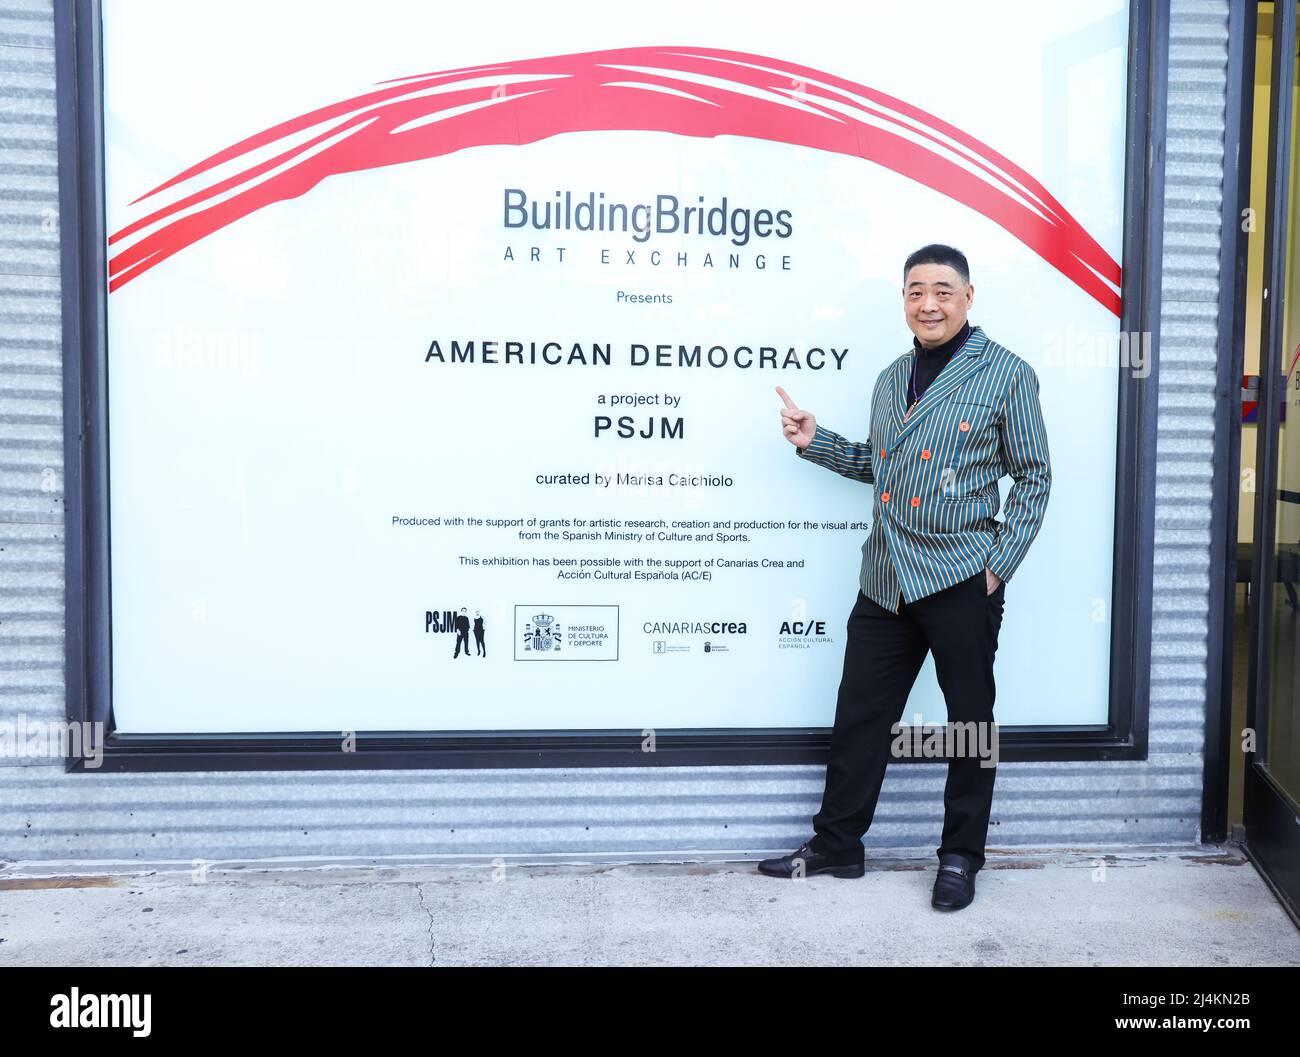 Santa Monica, California, USA. 14th April, 2022. TV host Joey Zhou attending the opening of PSJM's "American Democracy" art exhibition at Building Bridges Art Exchange at Bergamot Art Center in Santa Monica, California. The art exhibition featured 59 paintings, each representing the election year of a United States president and the historical results of each political party (red = Republican, blue = Democratic, etc.) displayed in a geometric format. Credit: Sheri Determan Stock Photo